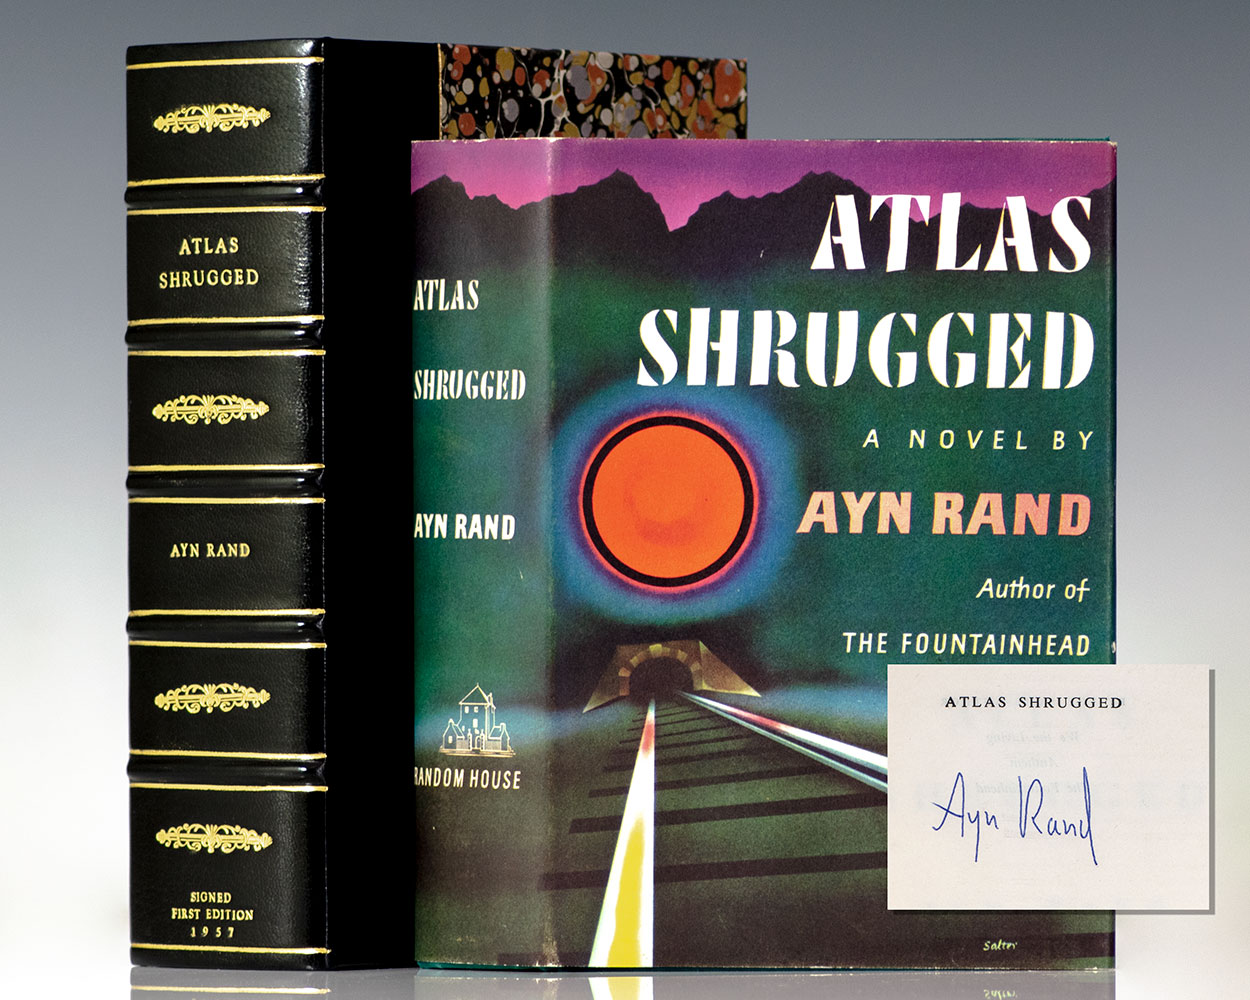 The Atlas Six (Signed First Edition with